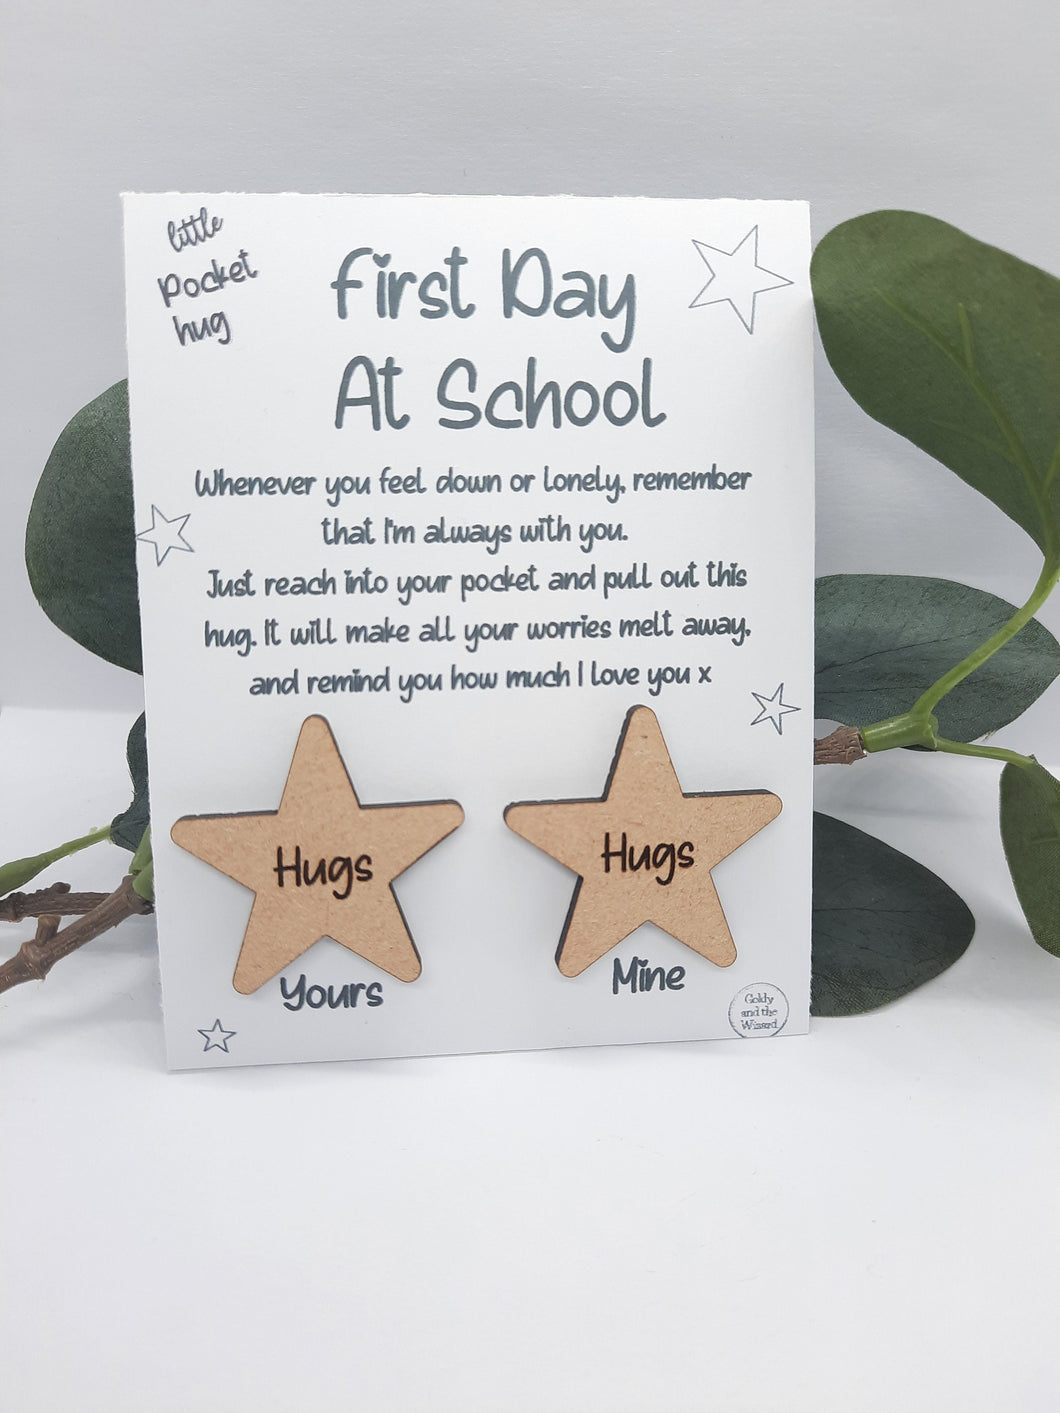 First Day At School little pocket hug token – Goldy And The Wizard